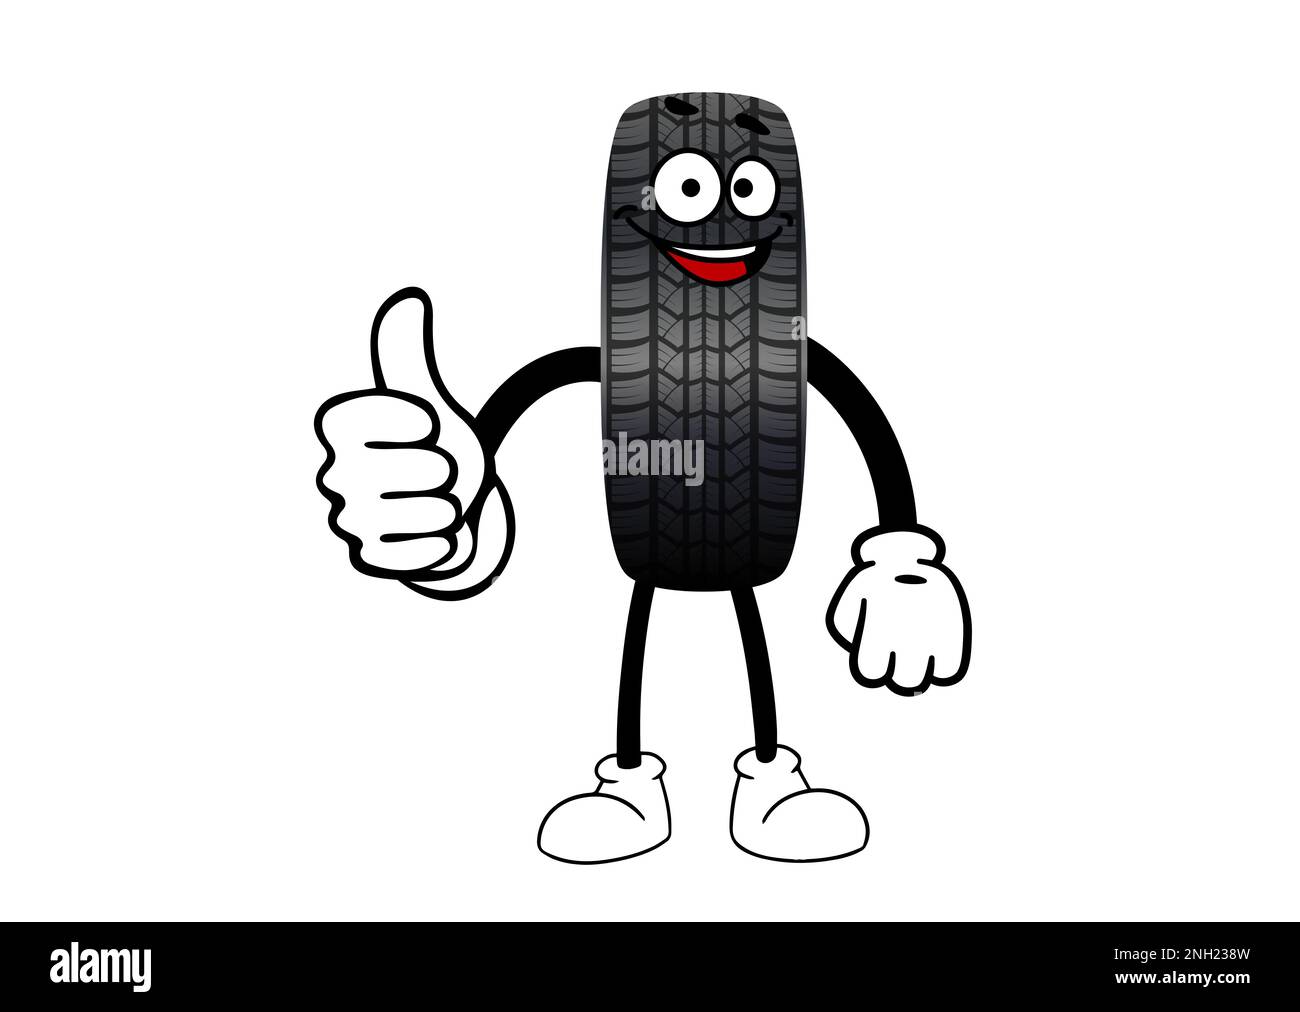 Mascot Illustration Featuring a Running/Rolling Tire Stock Photo